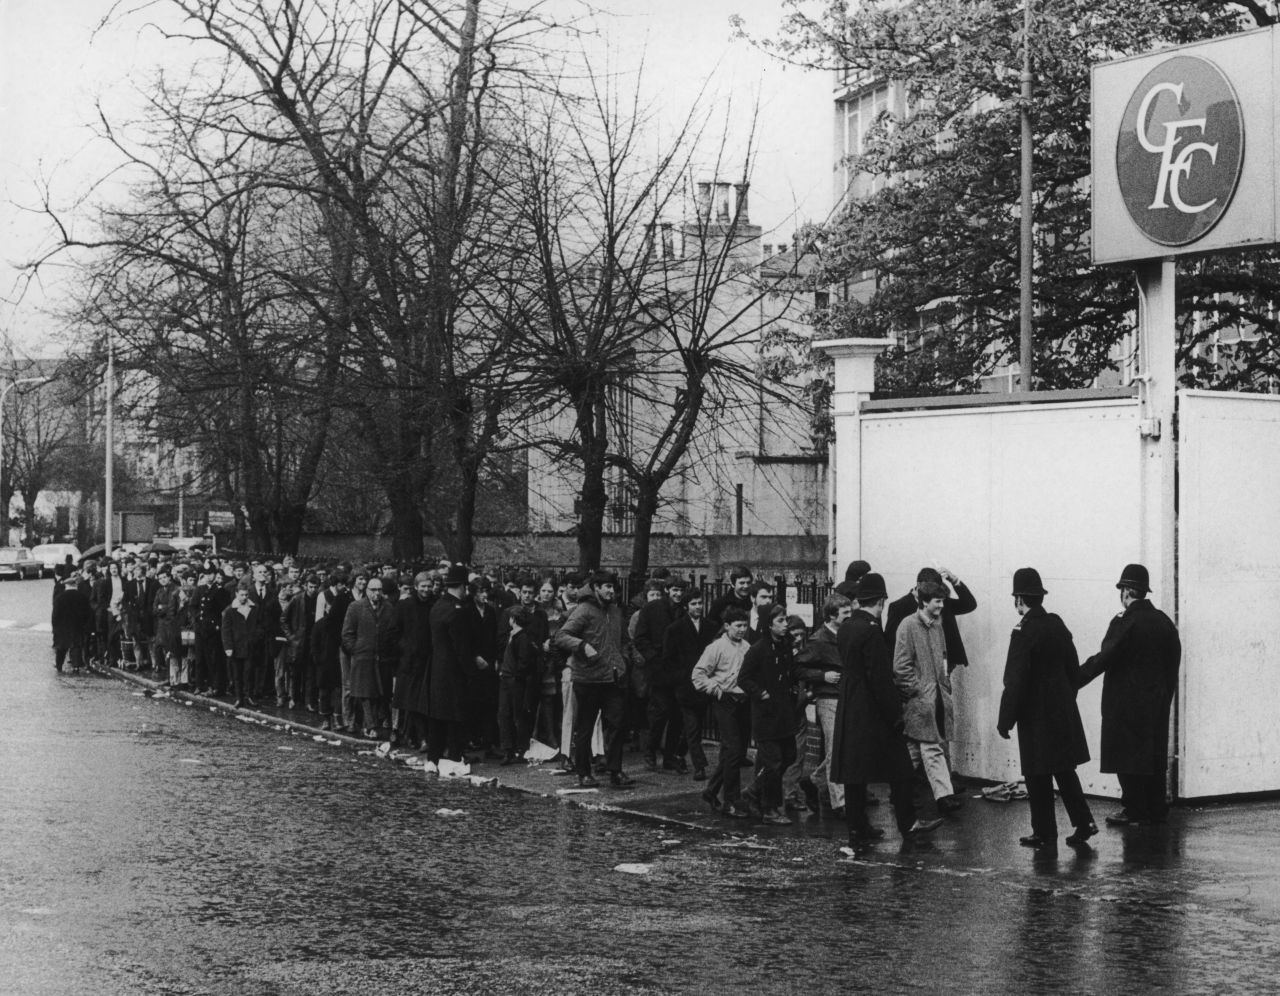 Chelsea fans queue for tickets to the 1970 FA Cup final replay between Chelsea and Leeds United, outside their club's Stamford Bridge ground. 